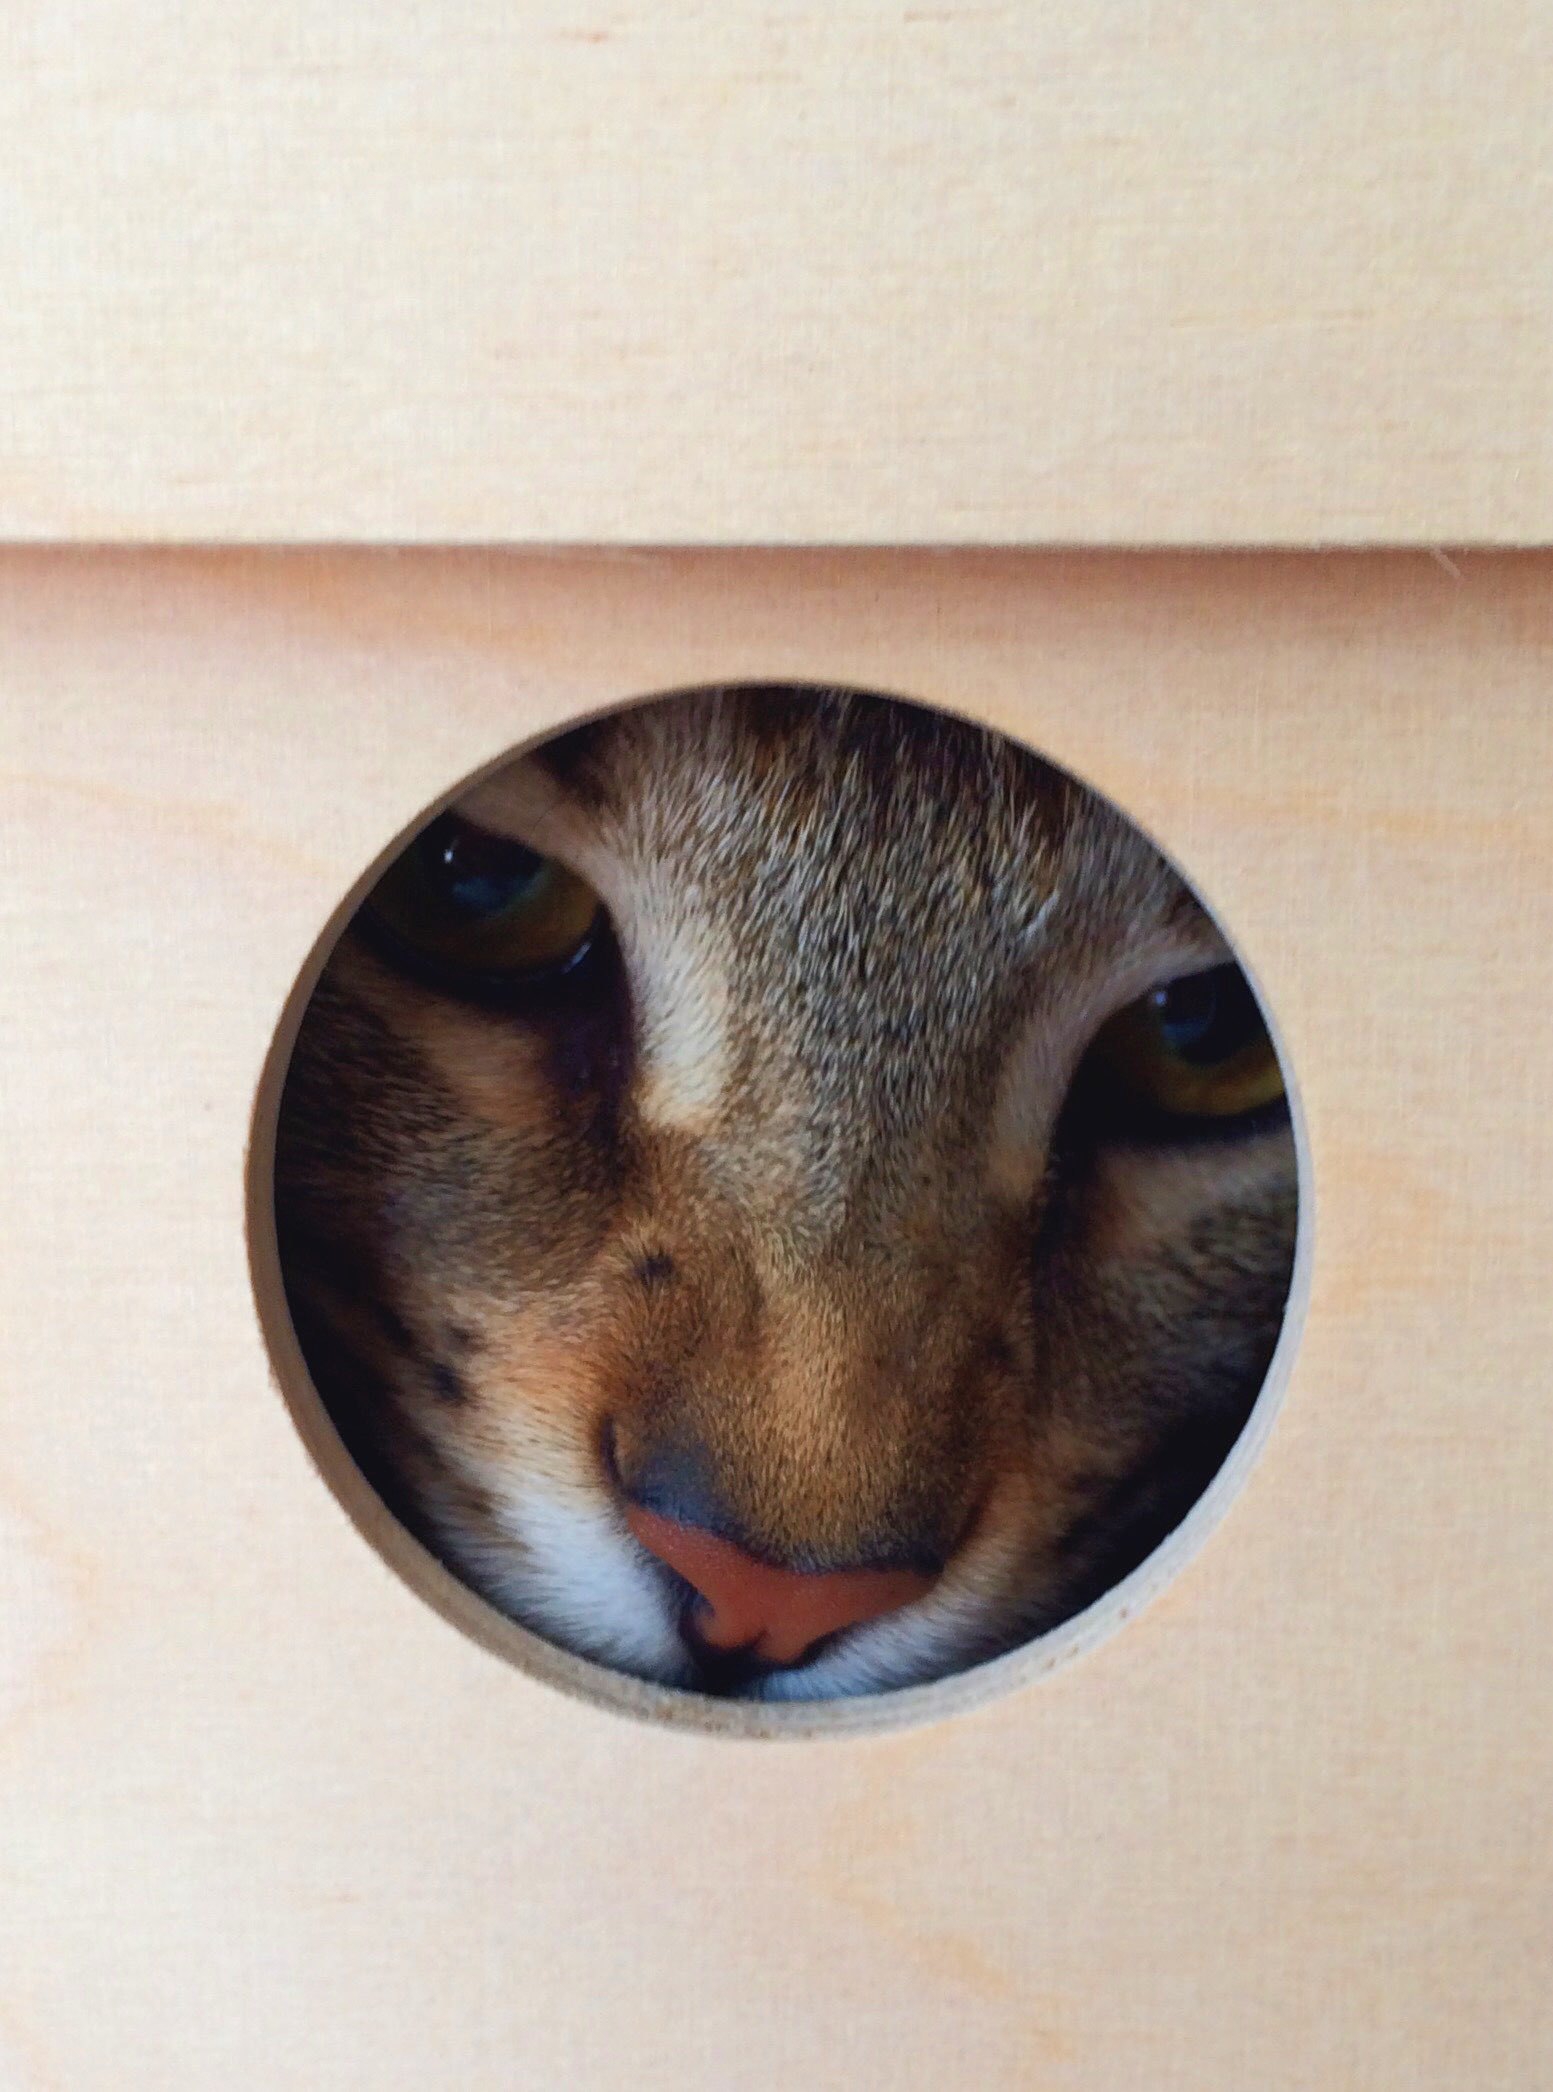 cat peeking out from inside a wooden box